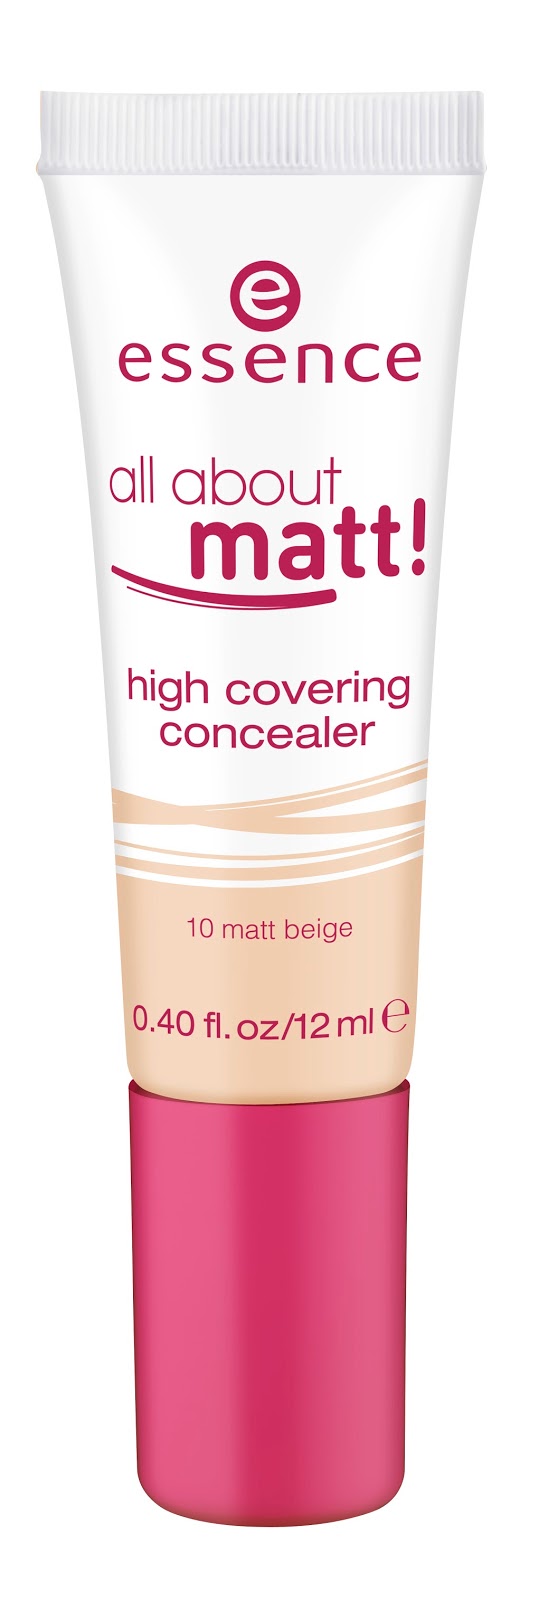 Essence all about matt! high covering concealer 